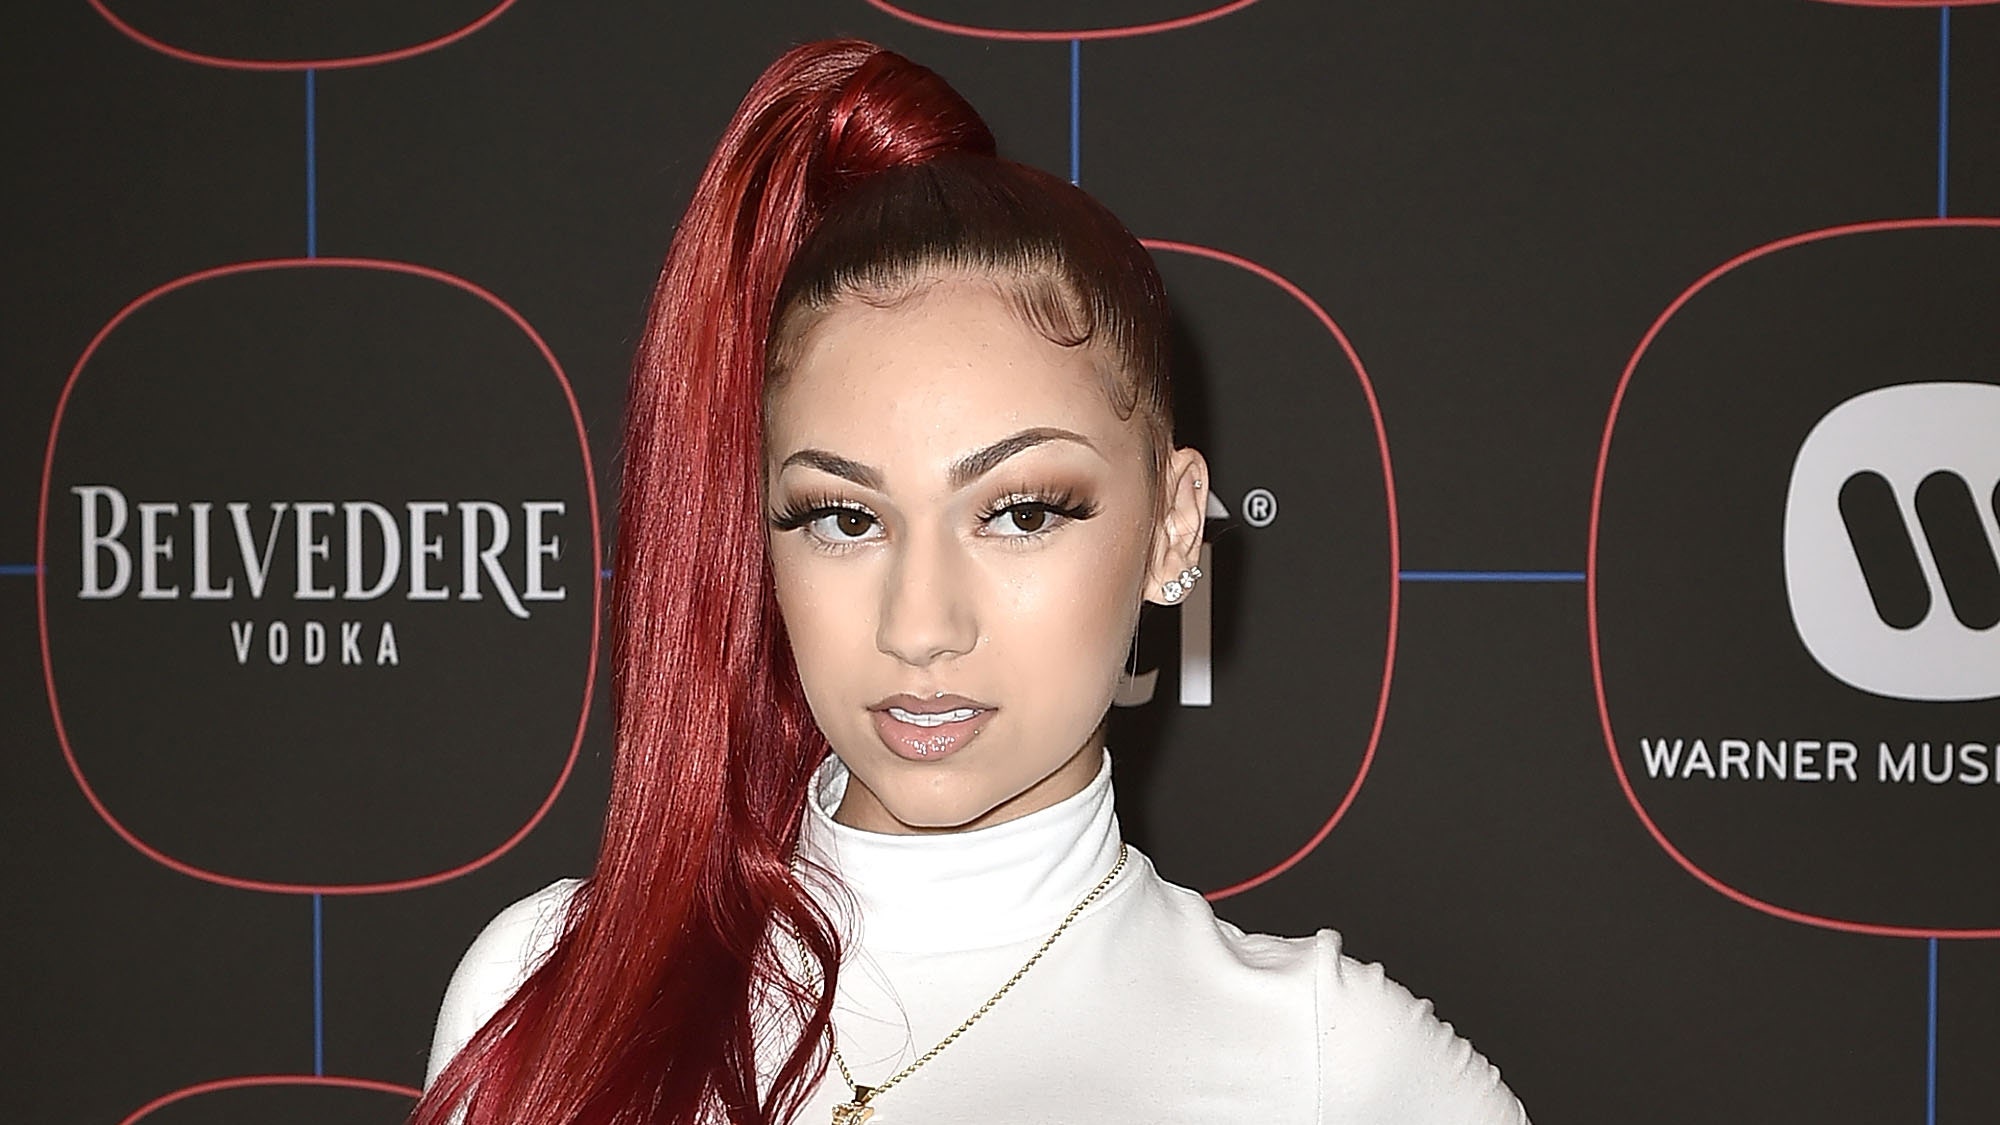 Bhad Bhabie calls out Dr. Phil, alleges abuse at treatment camp she was sent to after appearing on the show